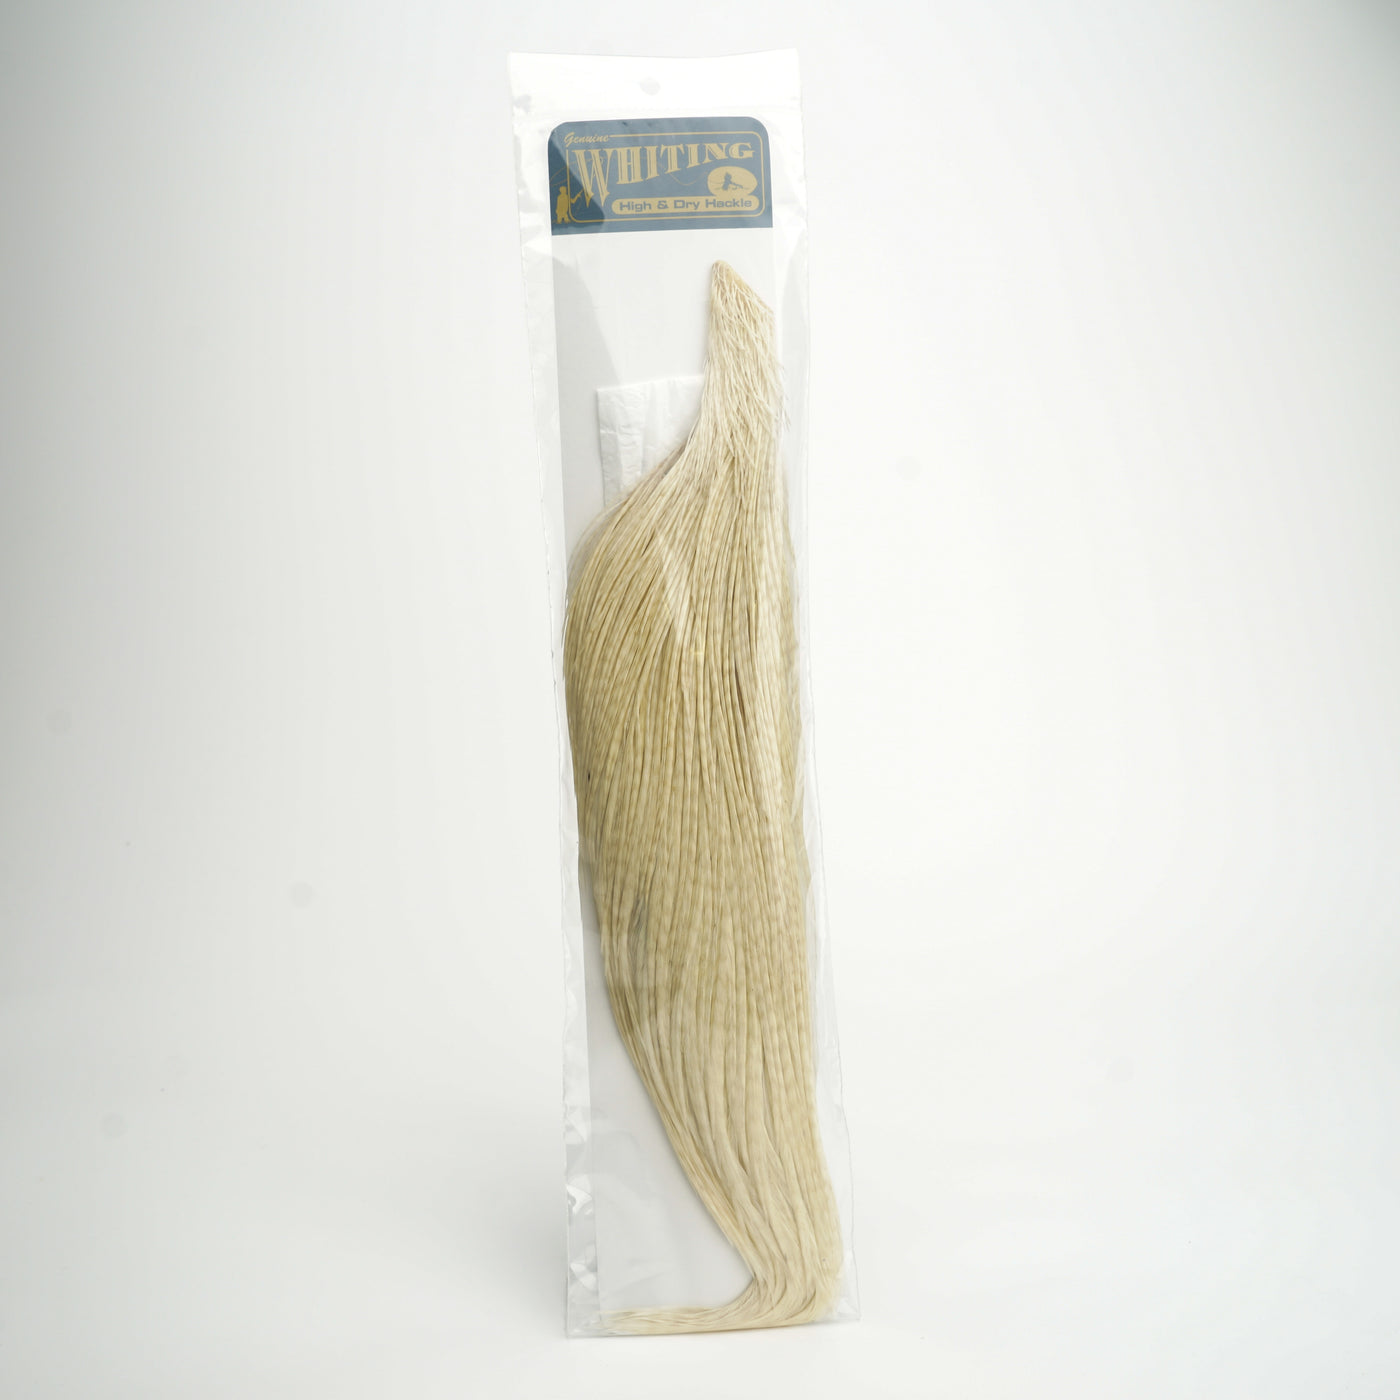 Whiting Farms High & Dry Hackle 1/2 Rooster Cape